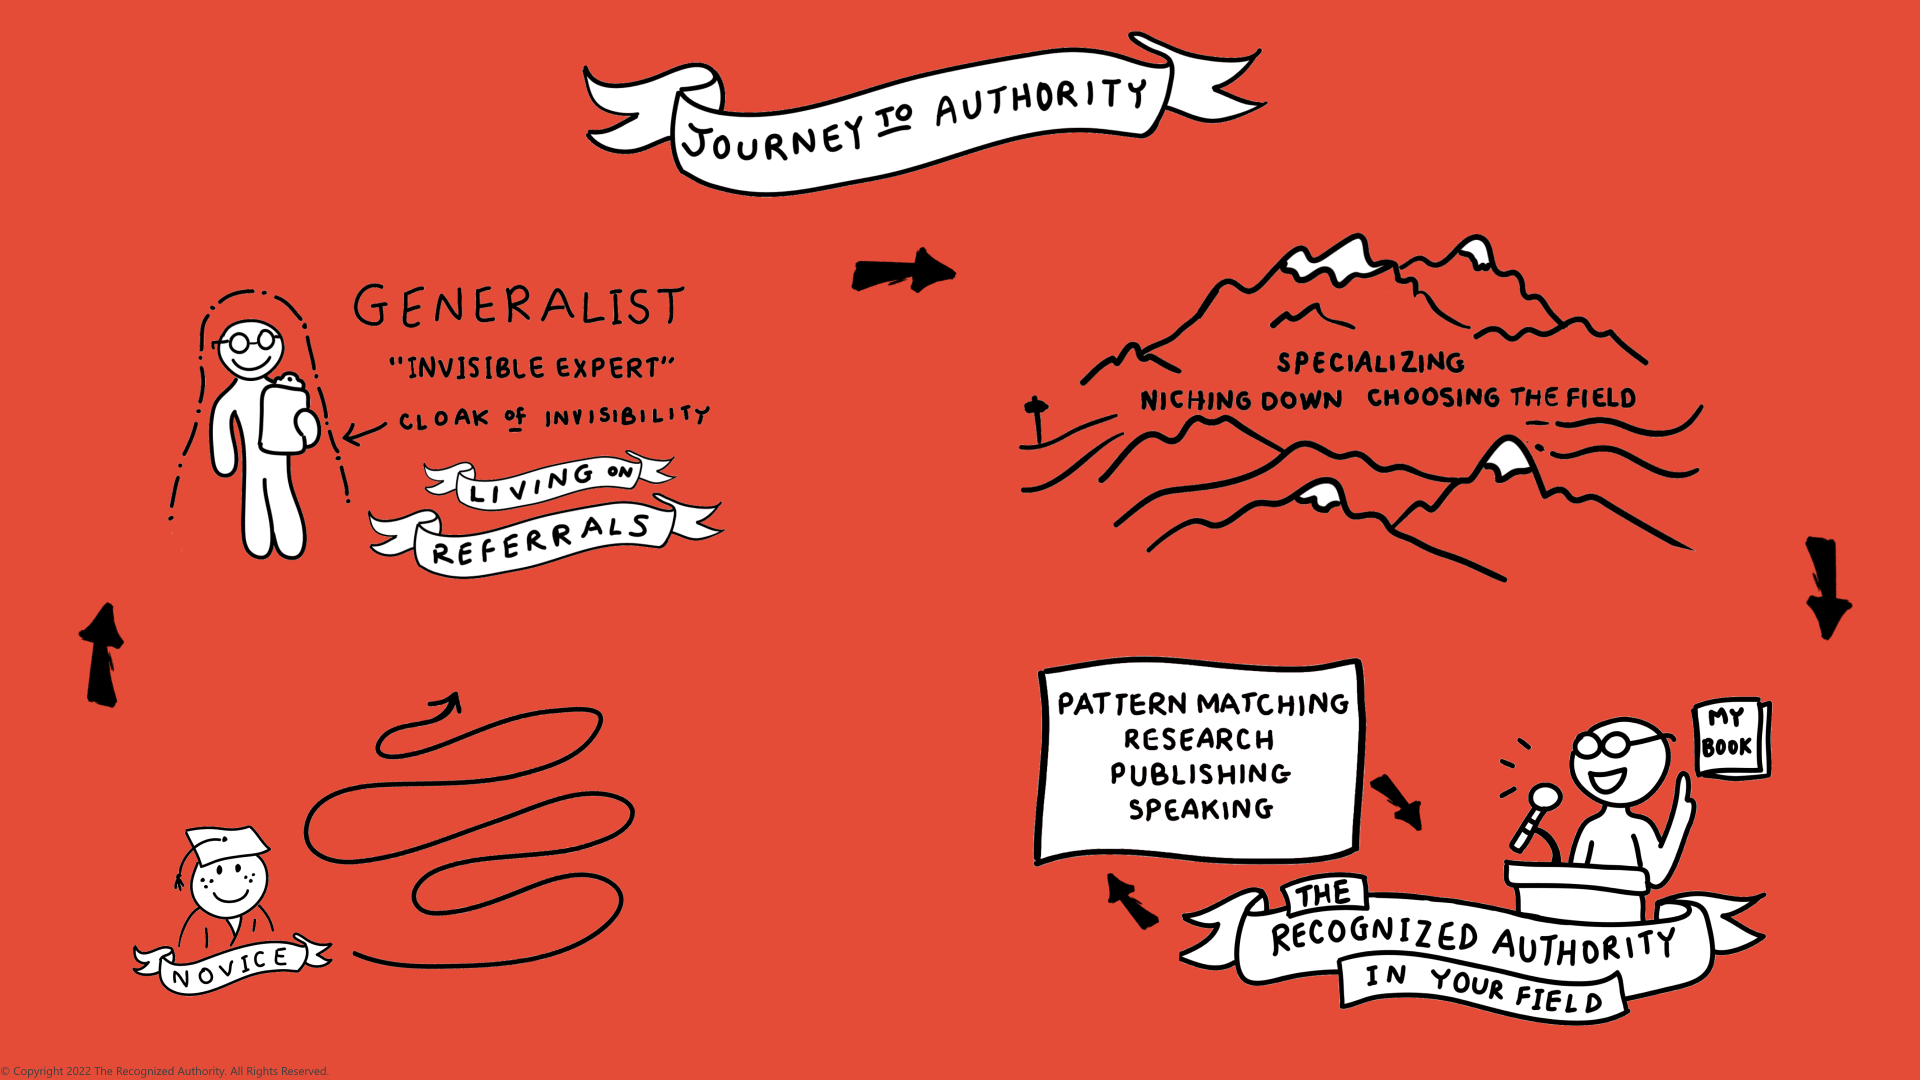 The Journey to Authority - from Novice to Generalist to Specialist to Authority